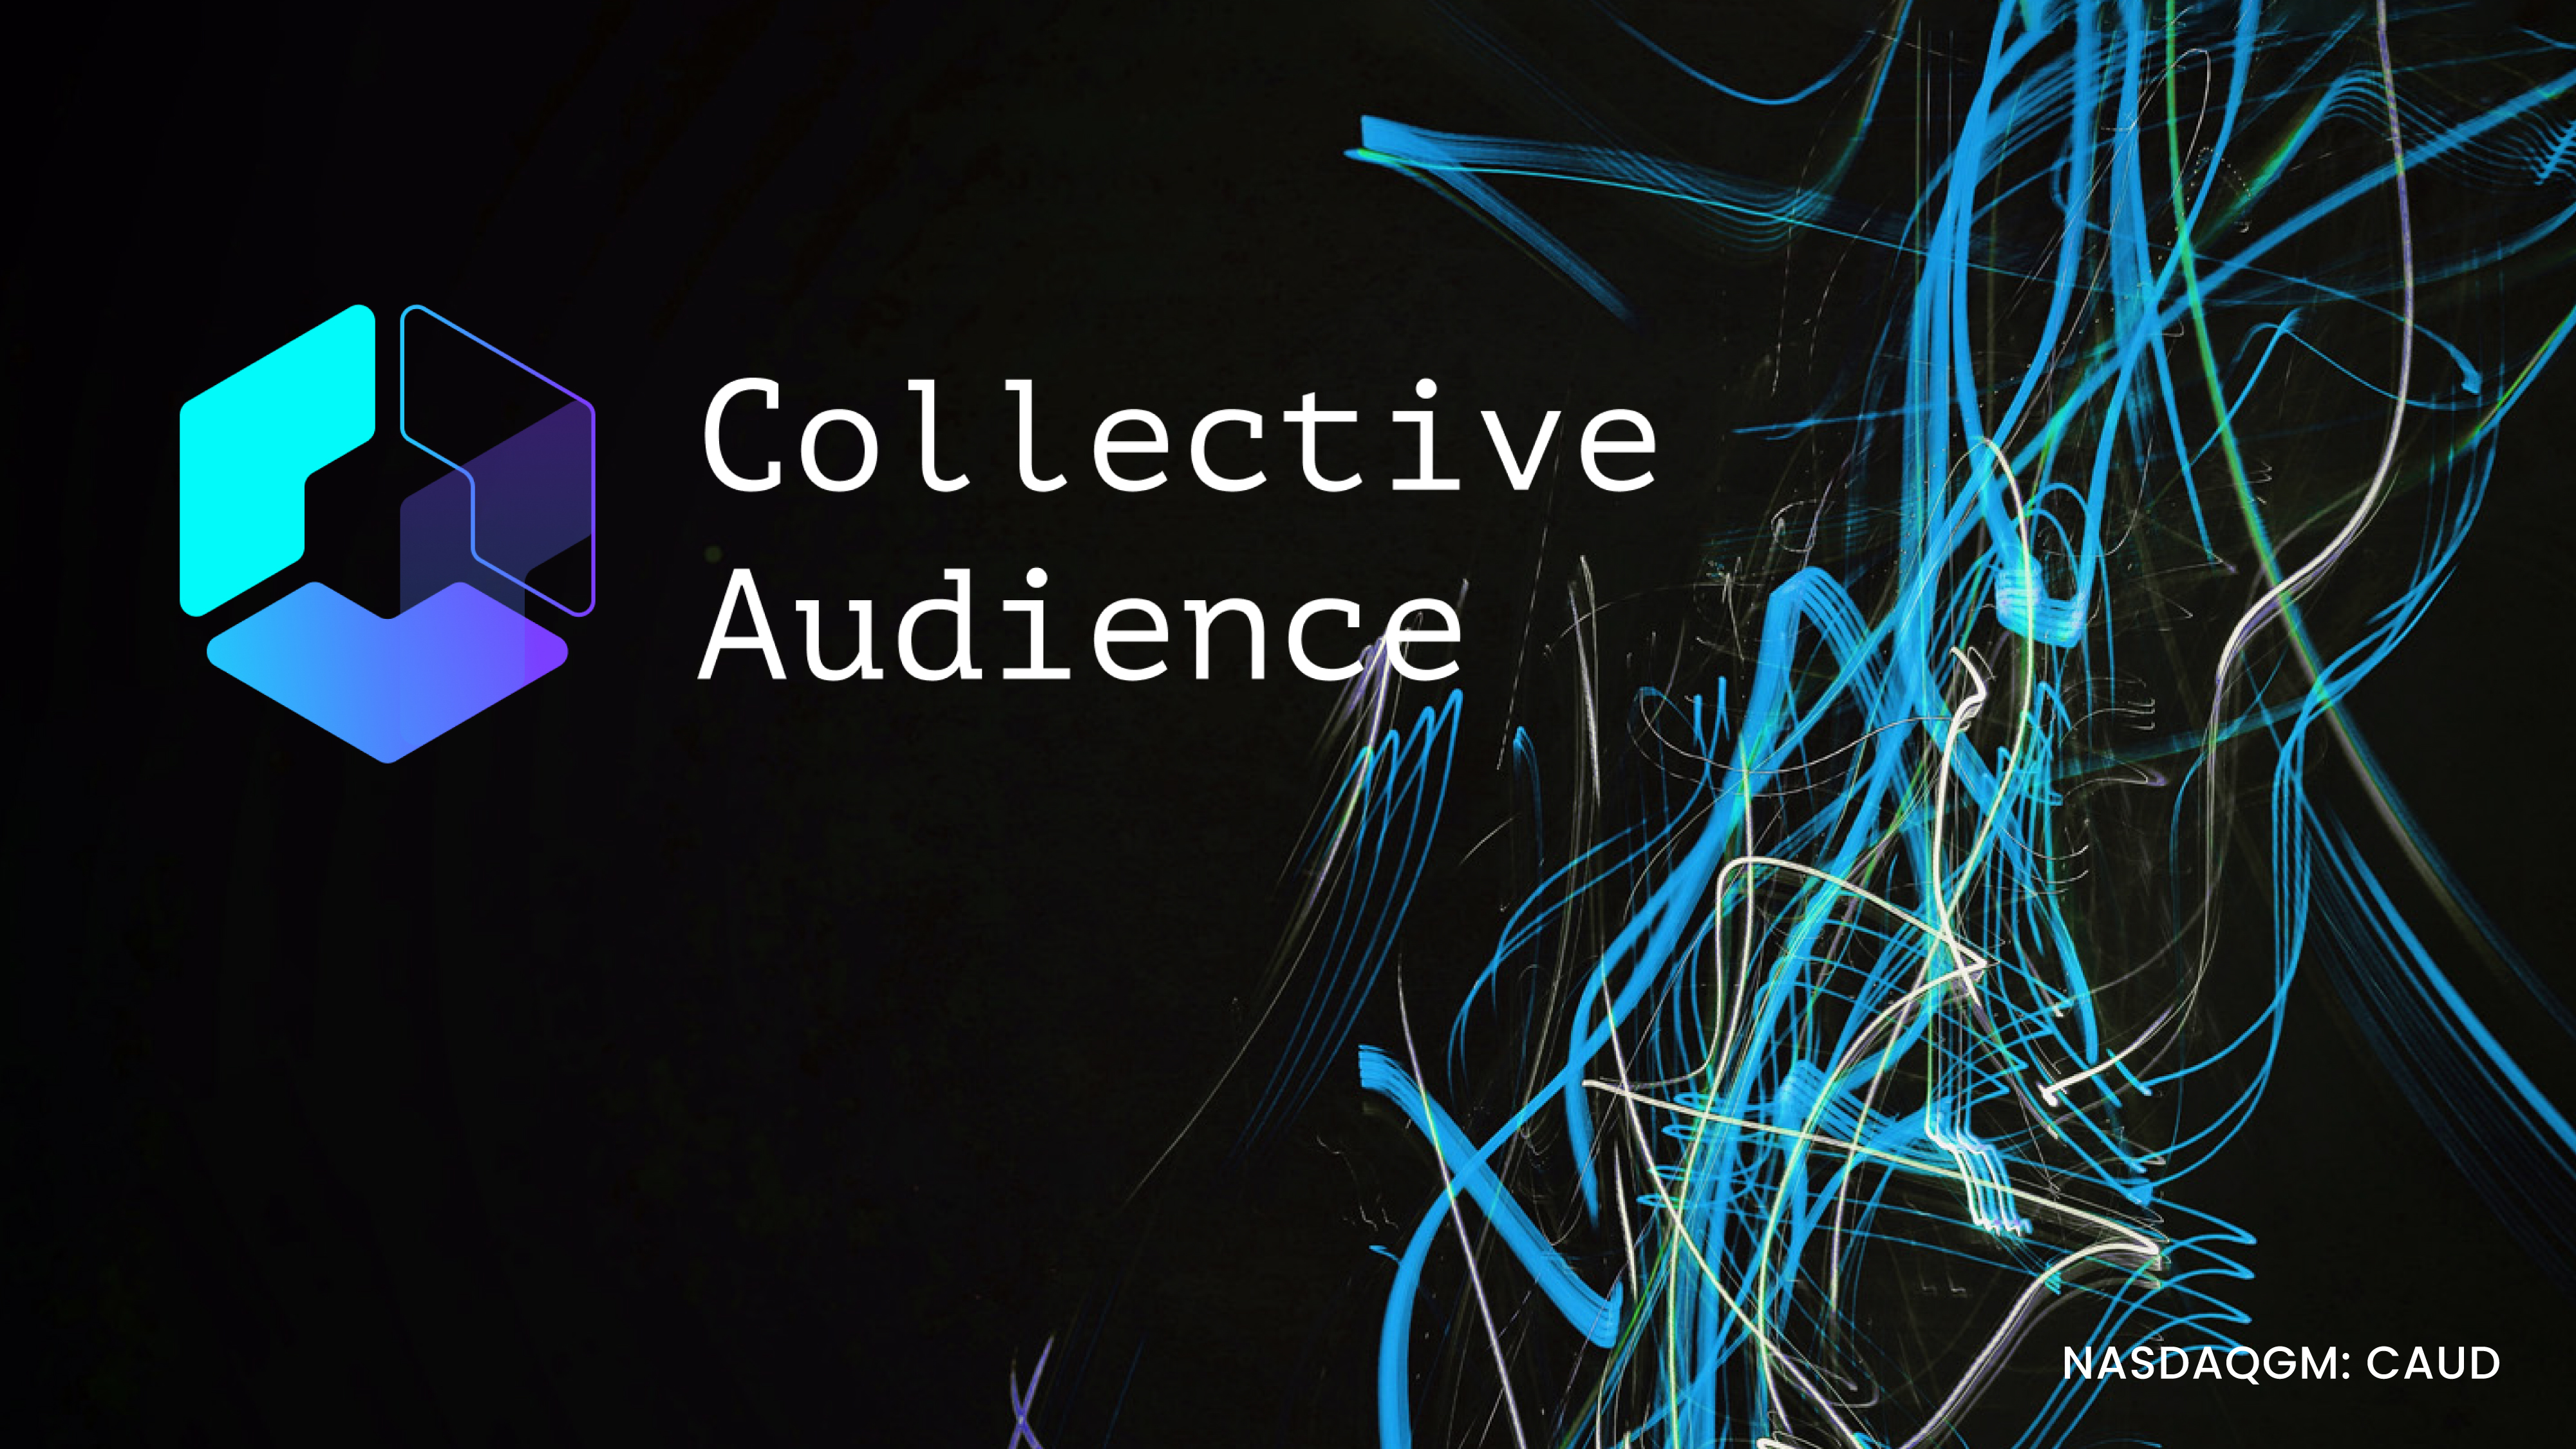 Collective Audience Is A Media Industry Game Changer; Its 47% February Rally Supports That Thesis ($CAUD)